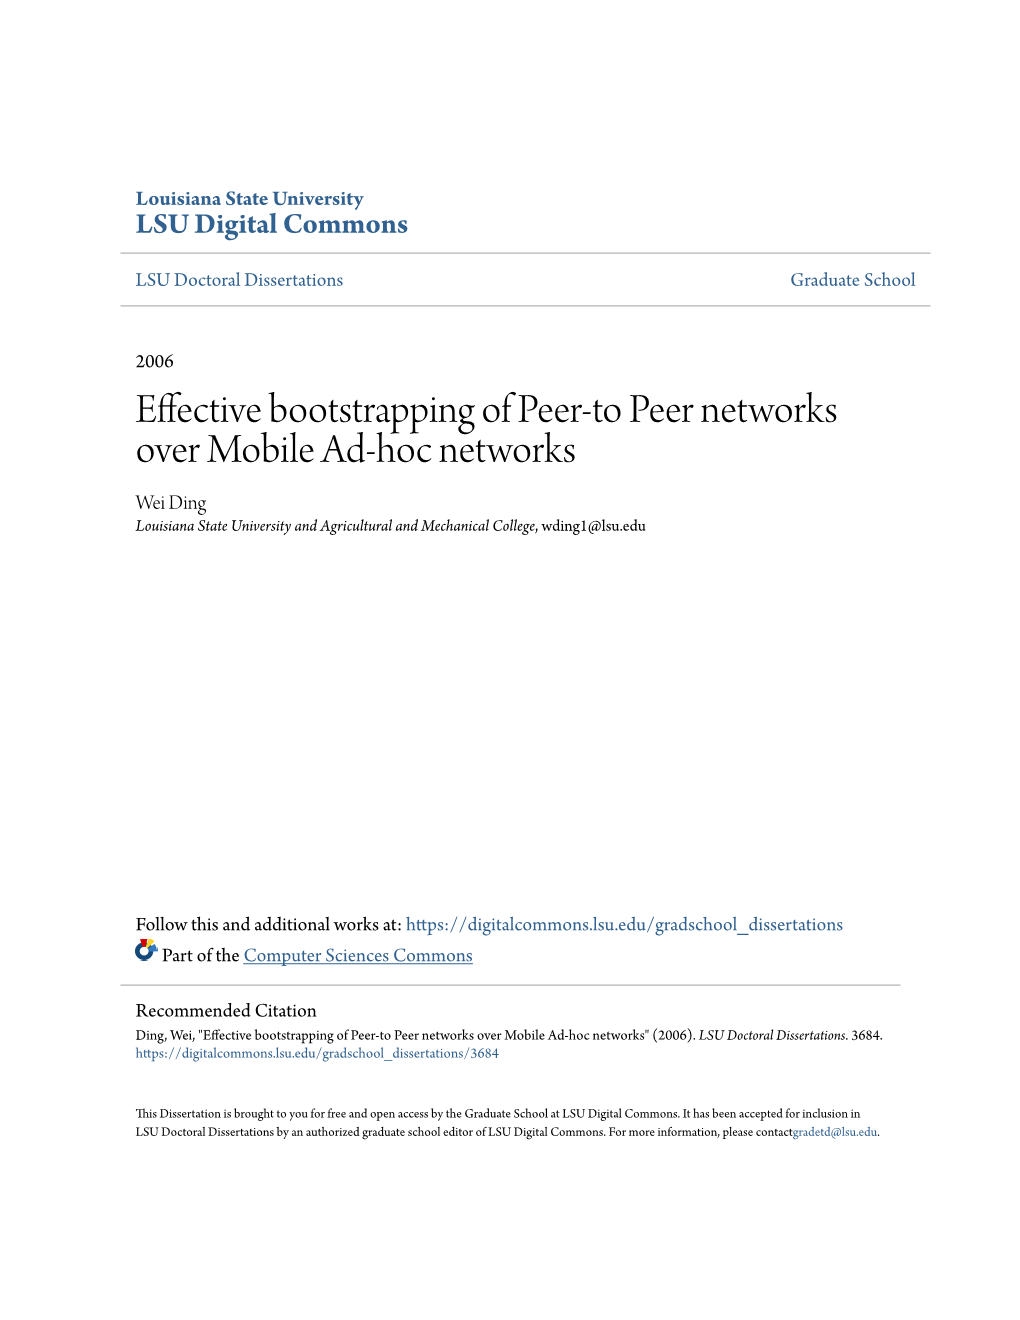 Effective Bootstrapping of Peer-To Peer Networks Over Mobile Ad-Hoc